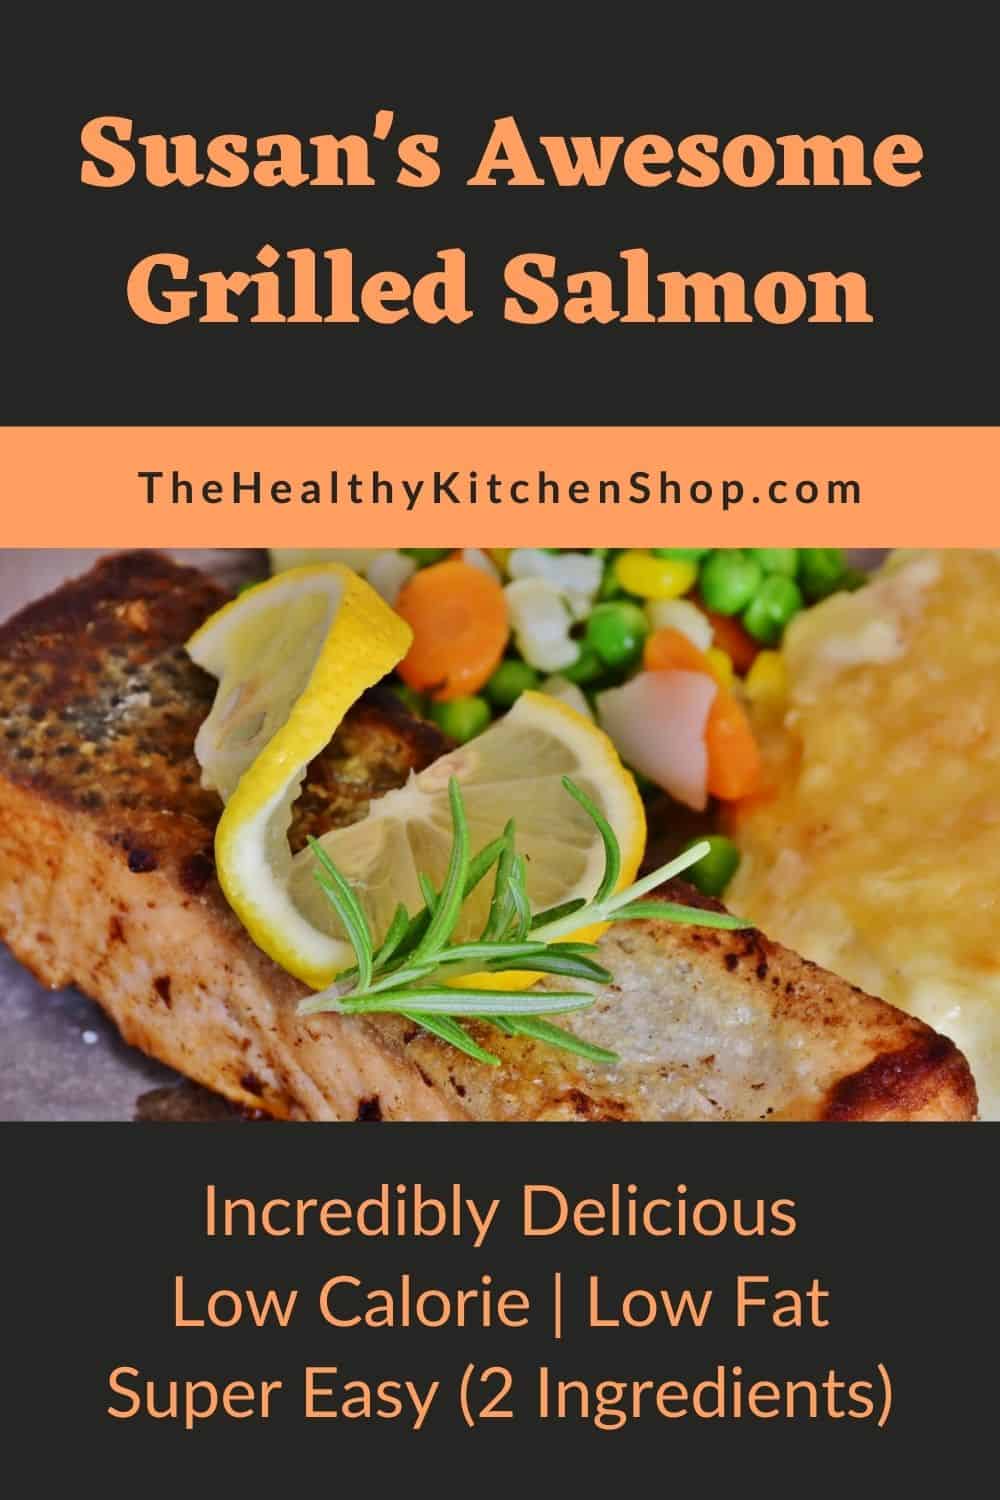 Grilled Salmon Recipe - Super Easy, Low Cal, Low Fat